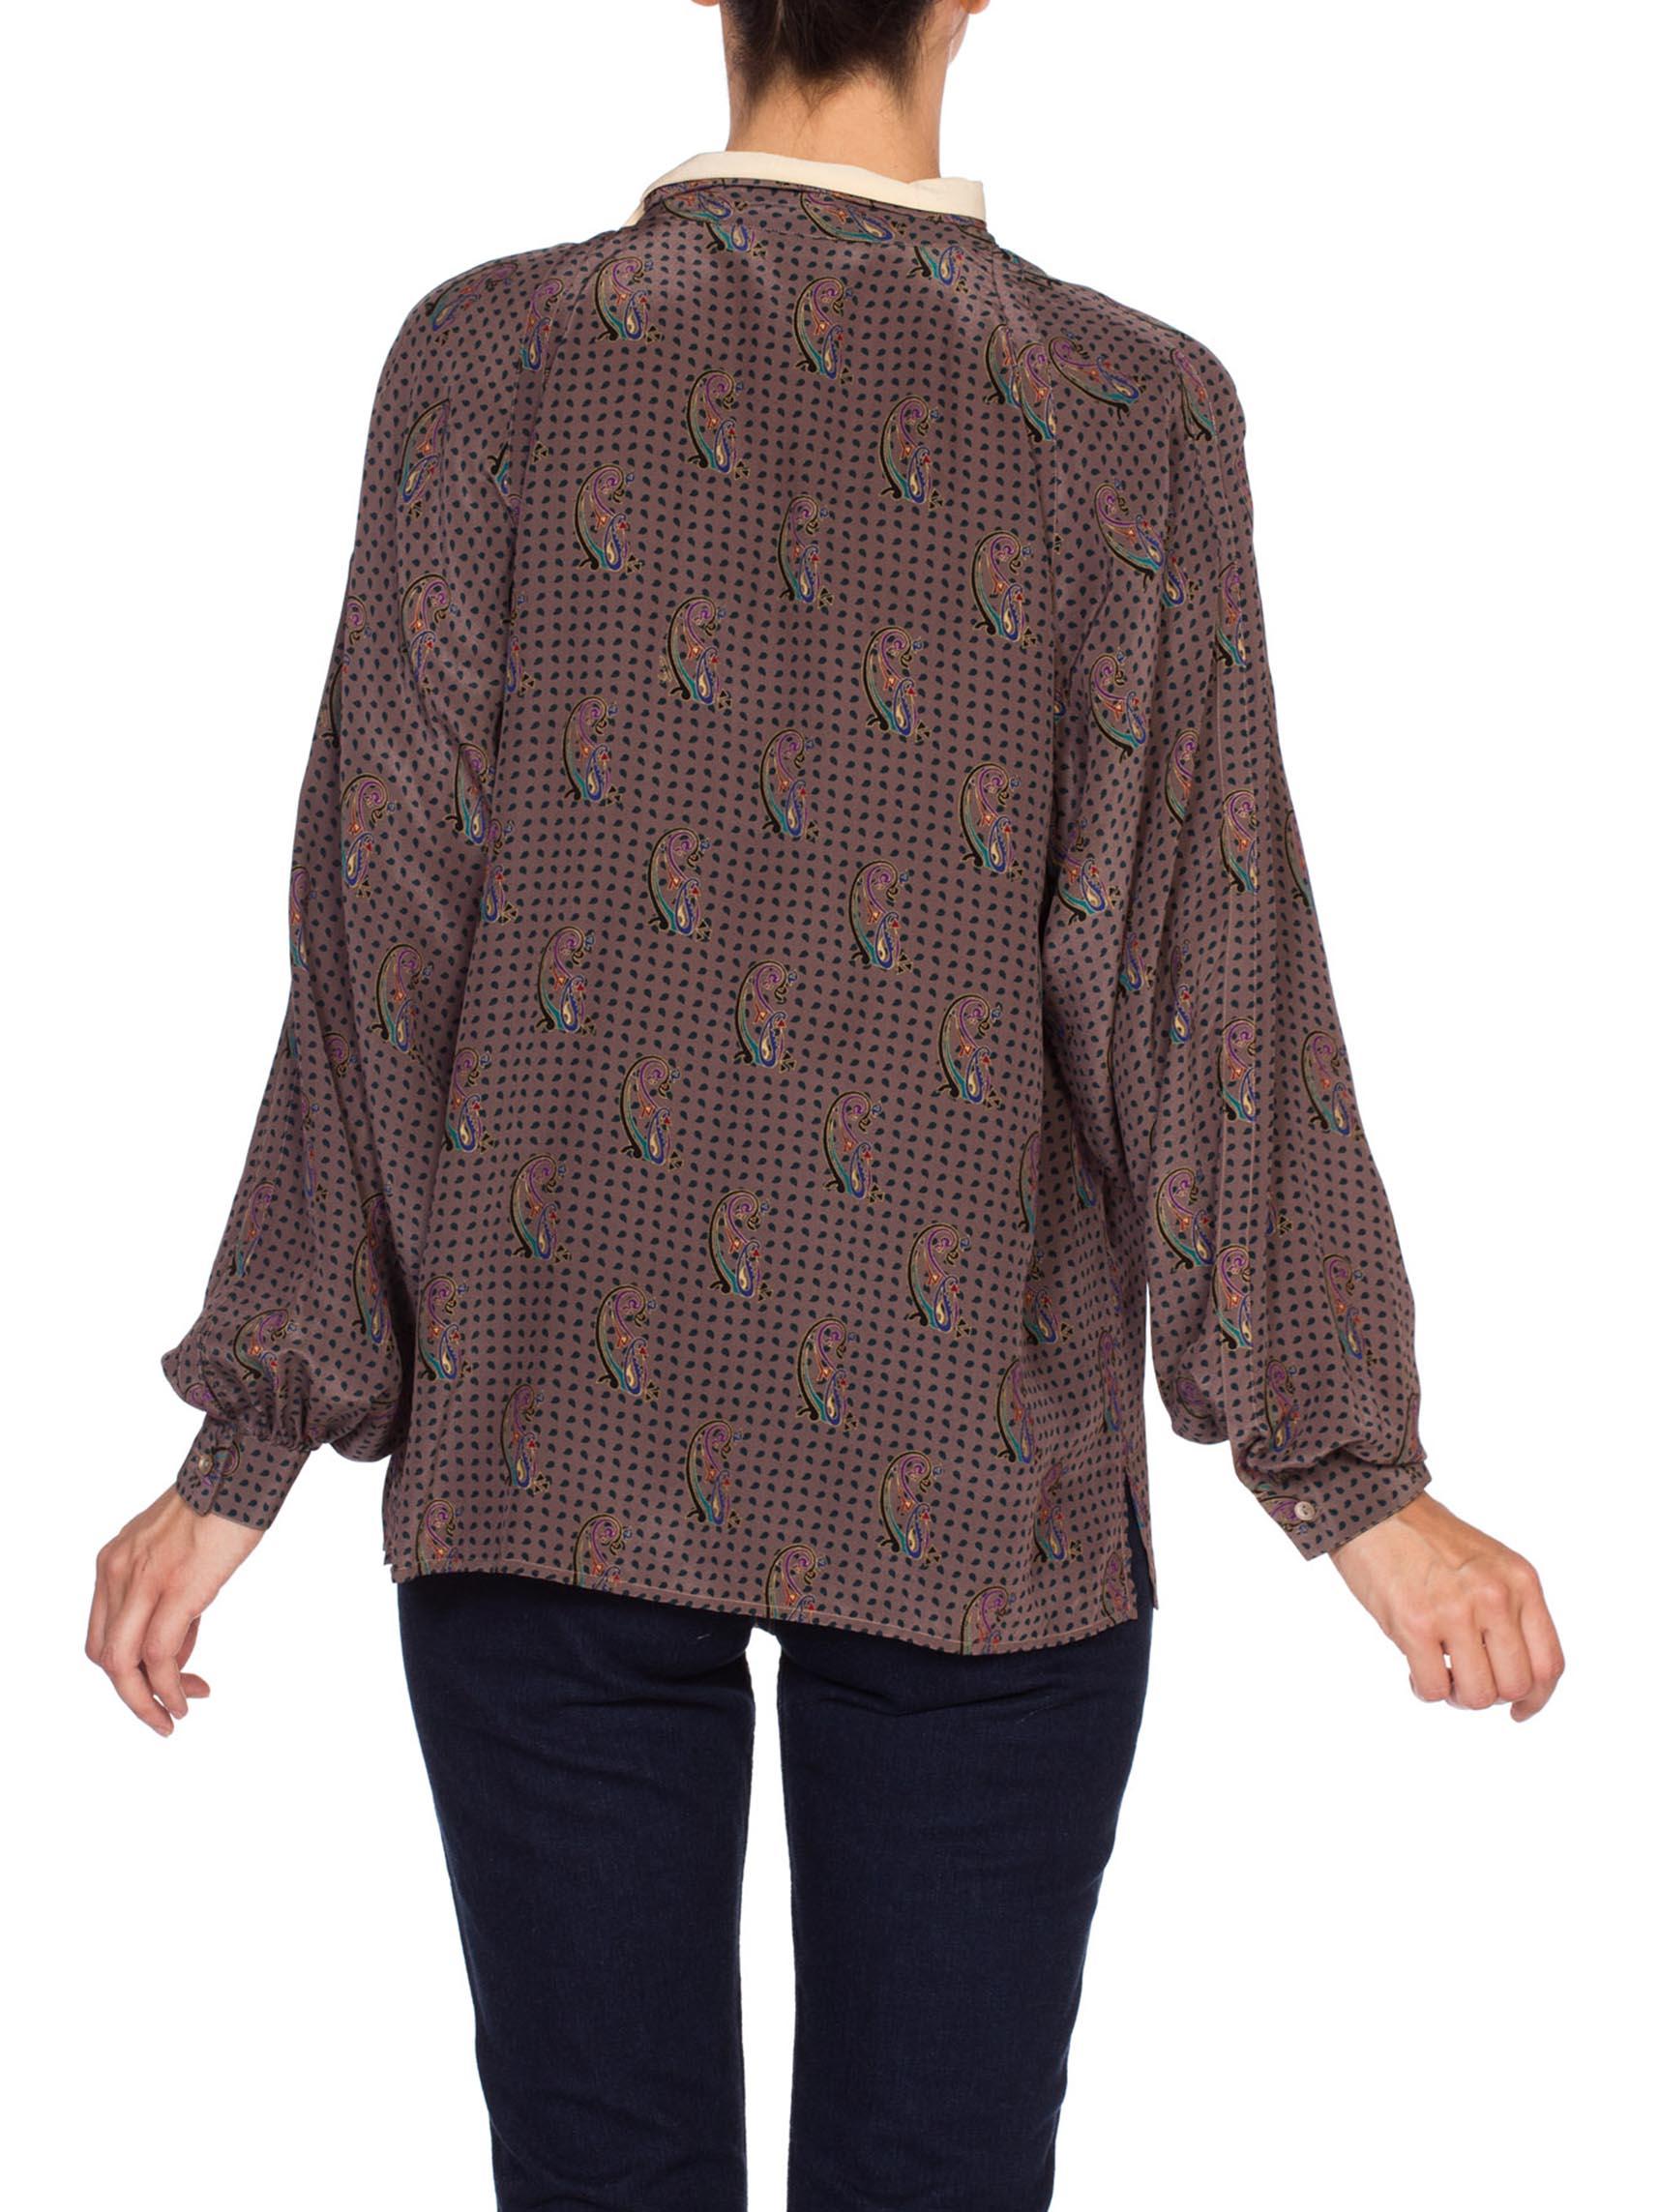 1970'S GUCCI Paisley Silk Blouse With Metallic Gold Print Top For Sale 6